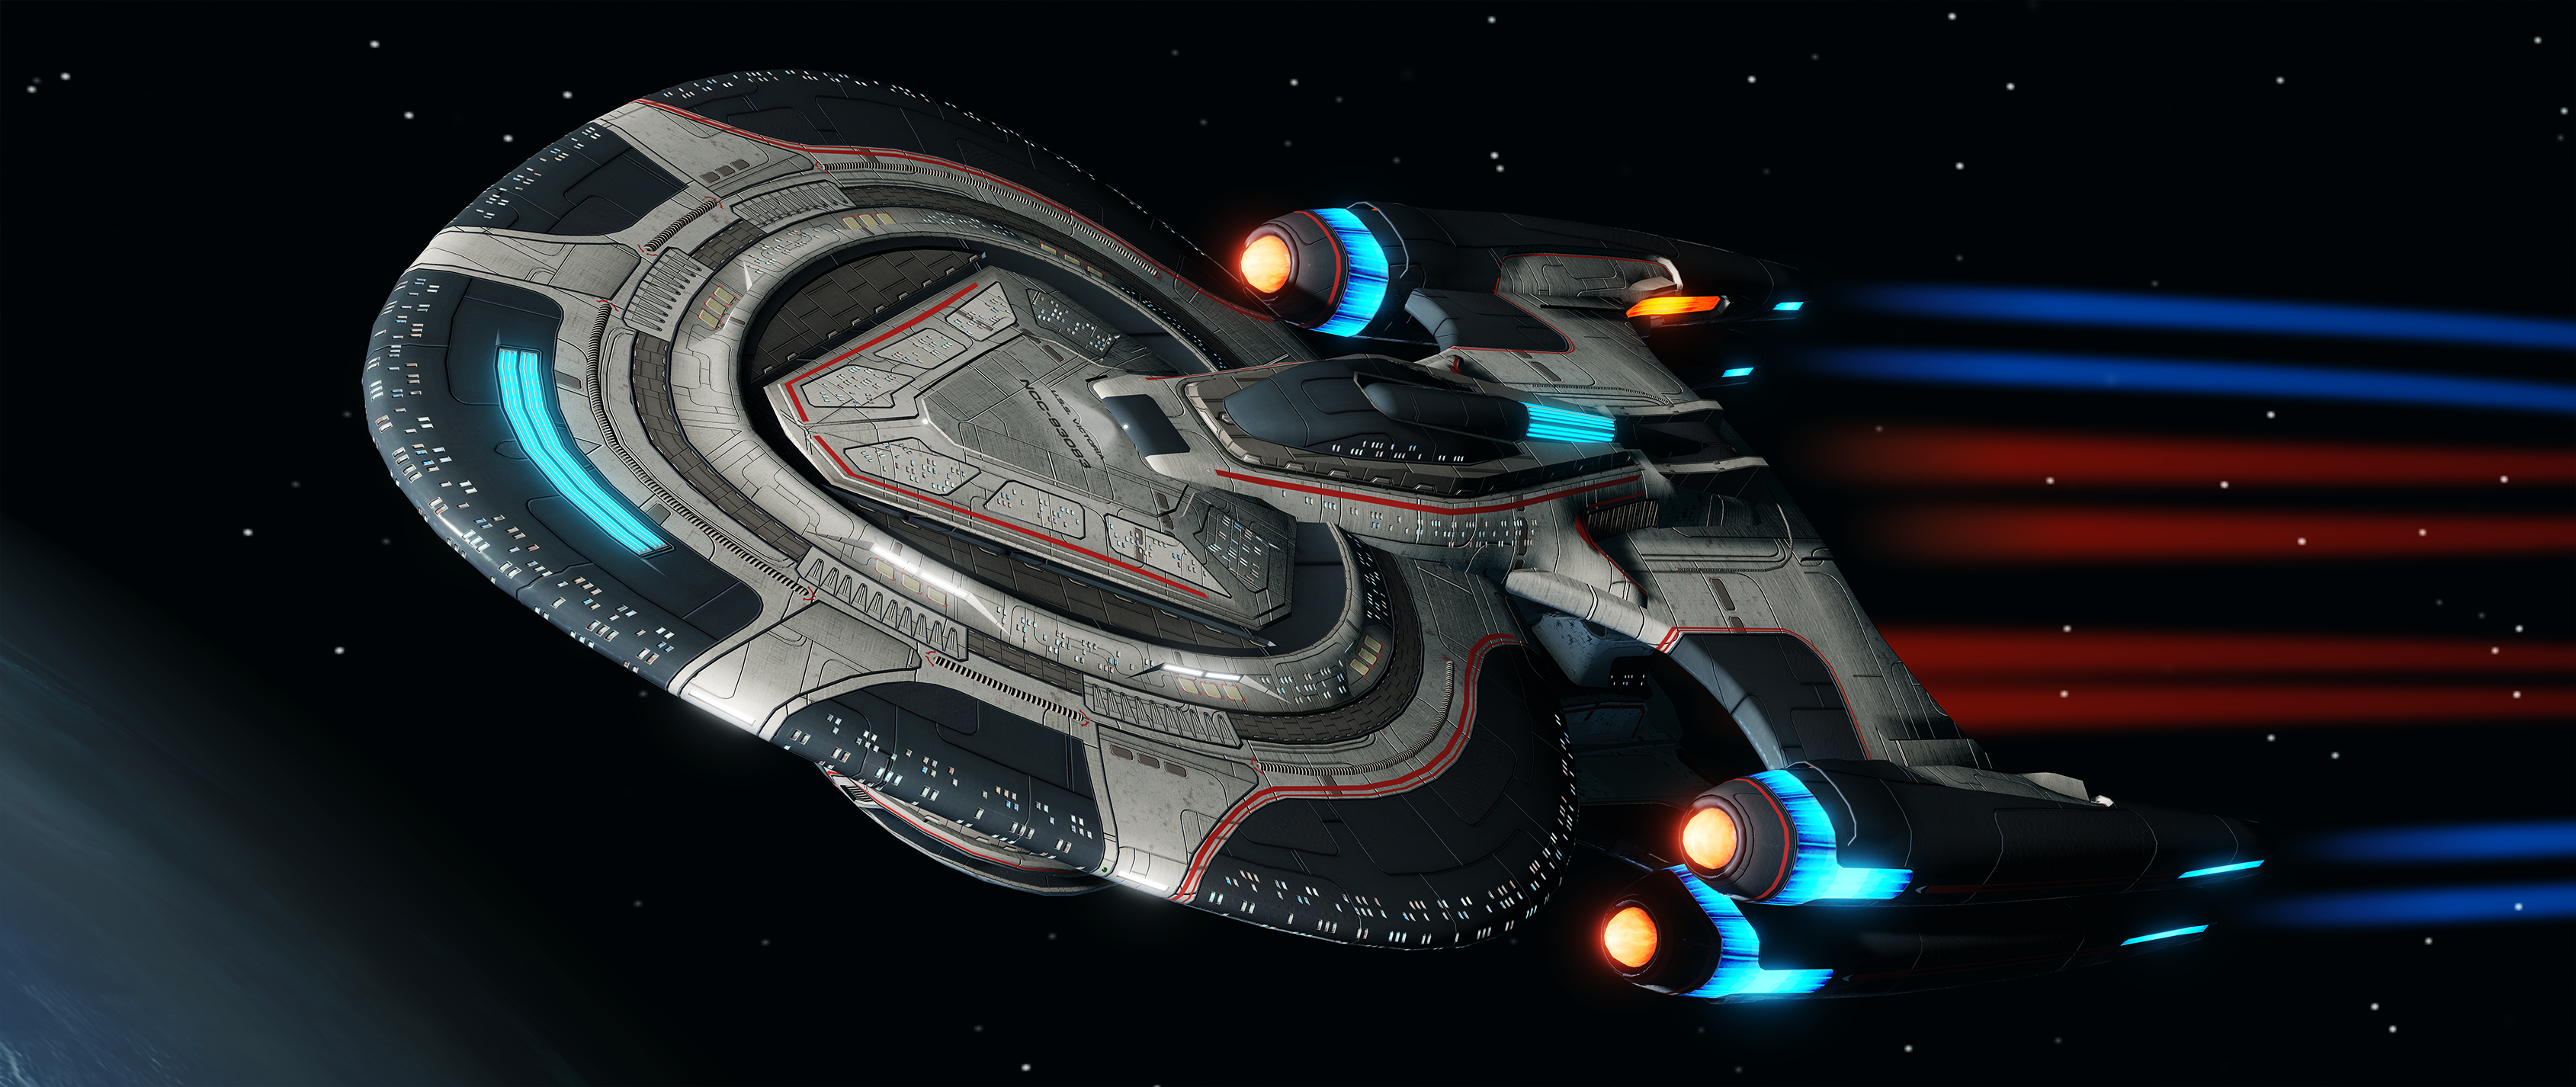 U.S.S Victoria - Modified Tucker Tactical Test Bed